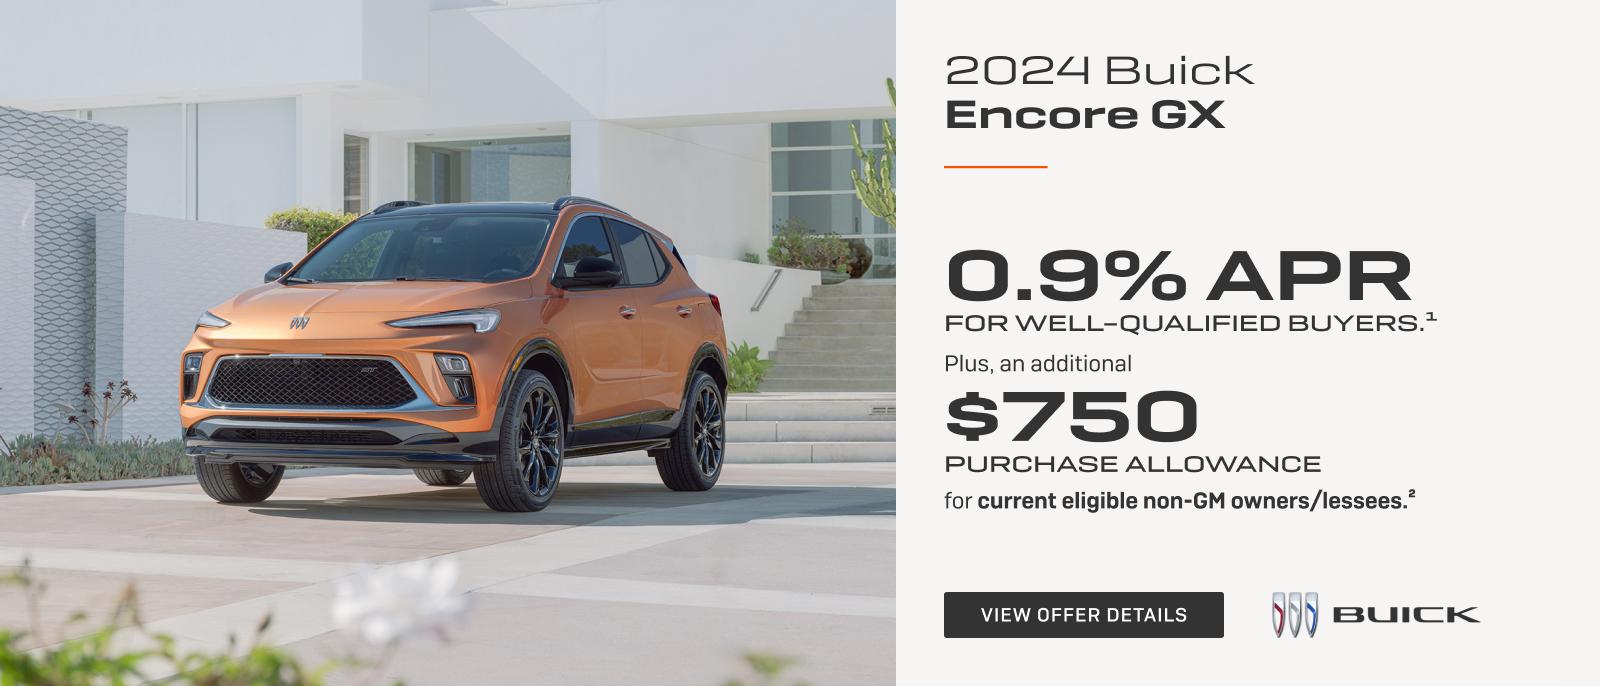 0.9% APR 
FOR WELL-QUALIFIED BUYERS.1

Plus, an additional $750 PURCHASE ALLOWANCE for current eligible non-GM owners/lessees.2